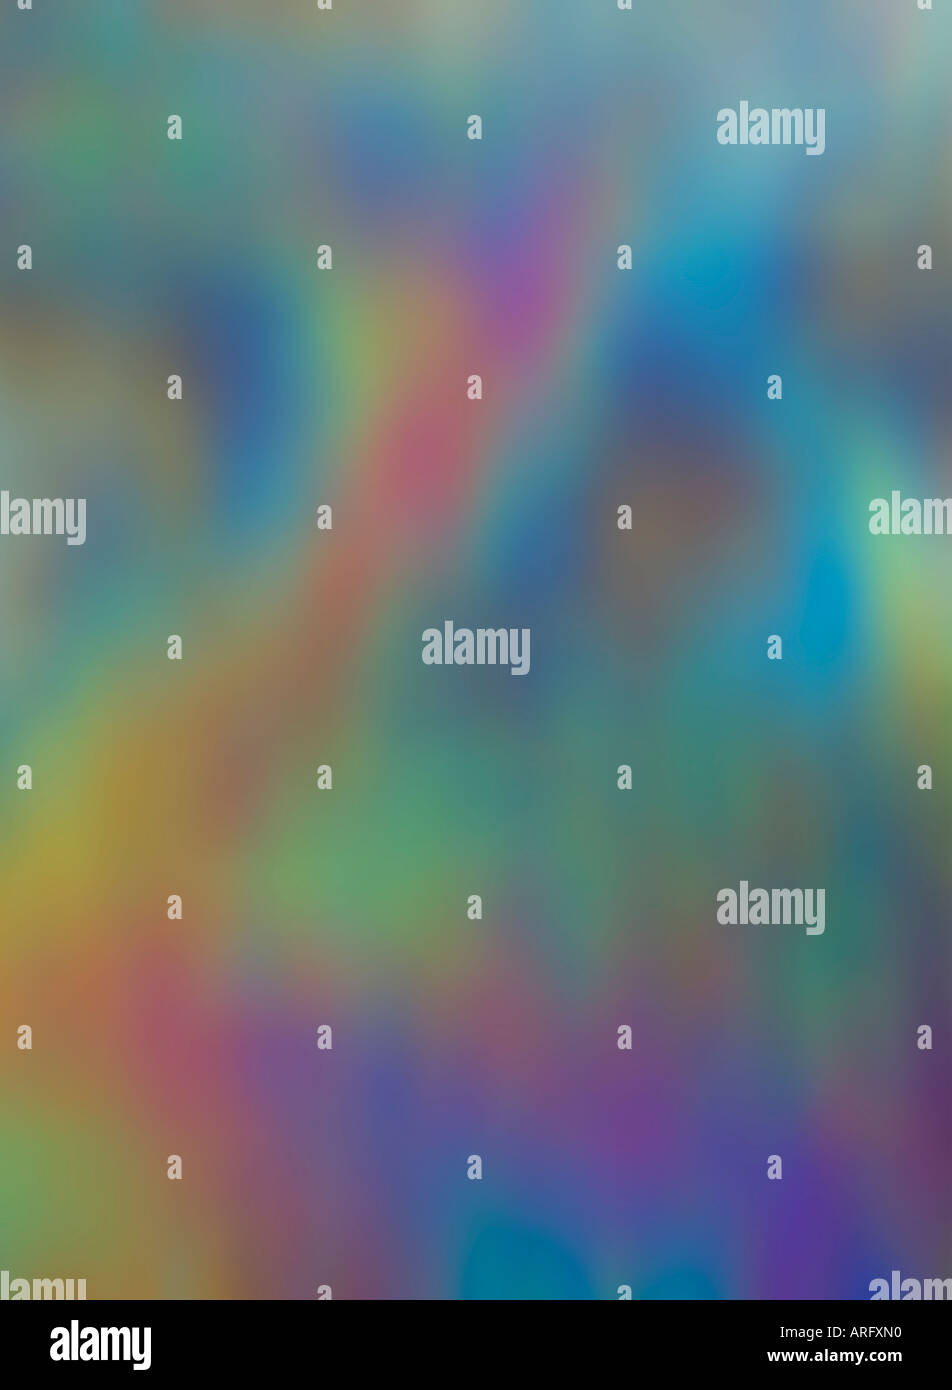 ABSTRACT BACKGROUND WITH SWIRLING COLOURED PATTERN Stock Photo